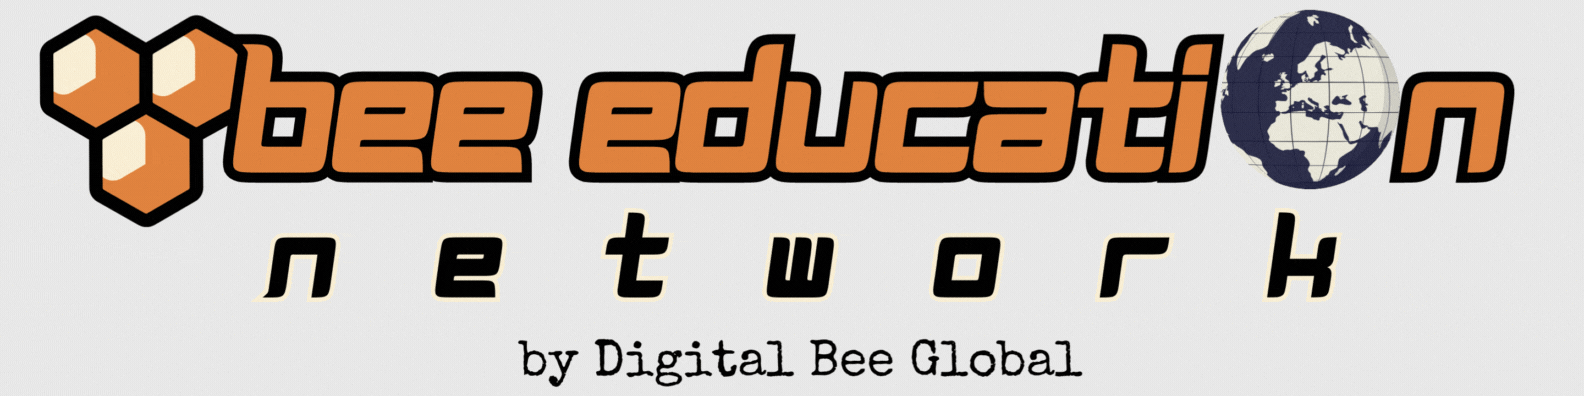 Bee Education Network